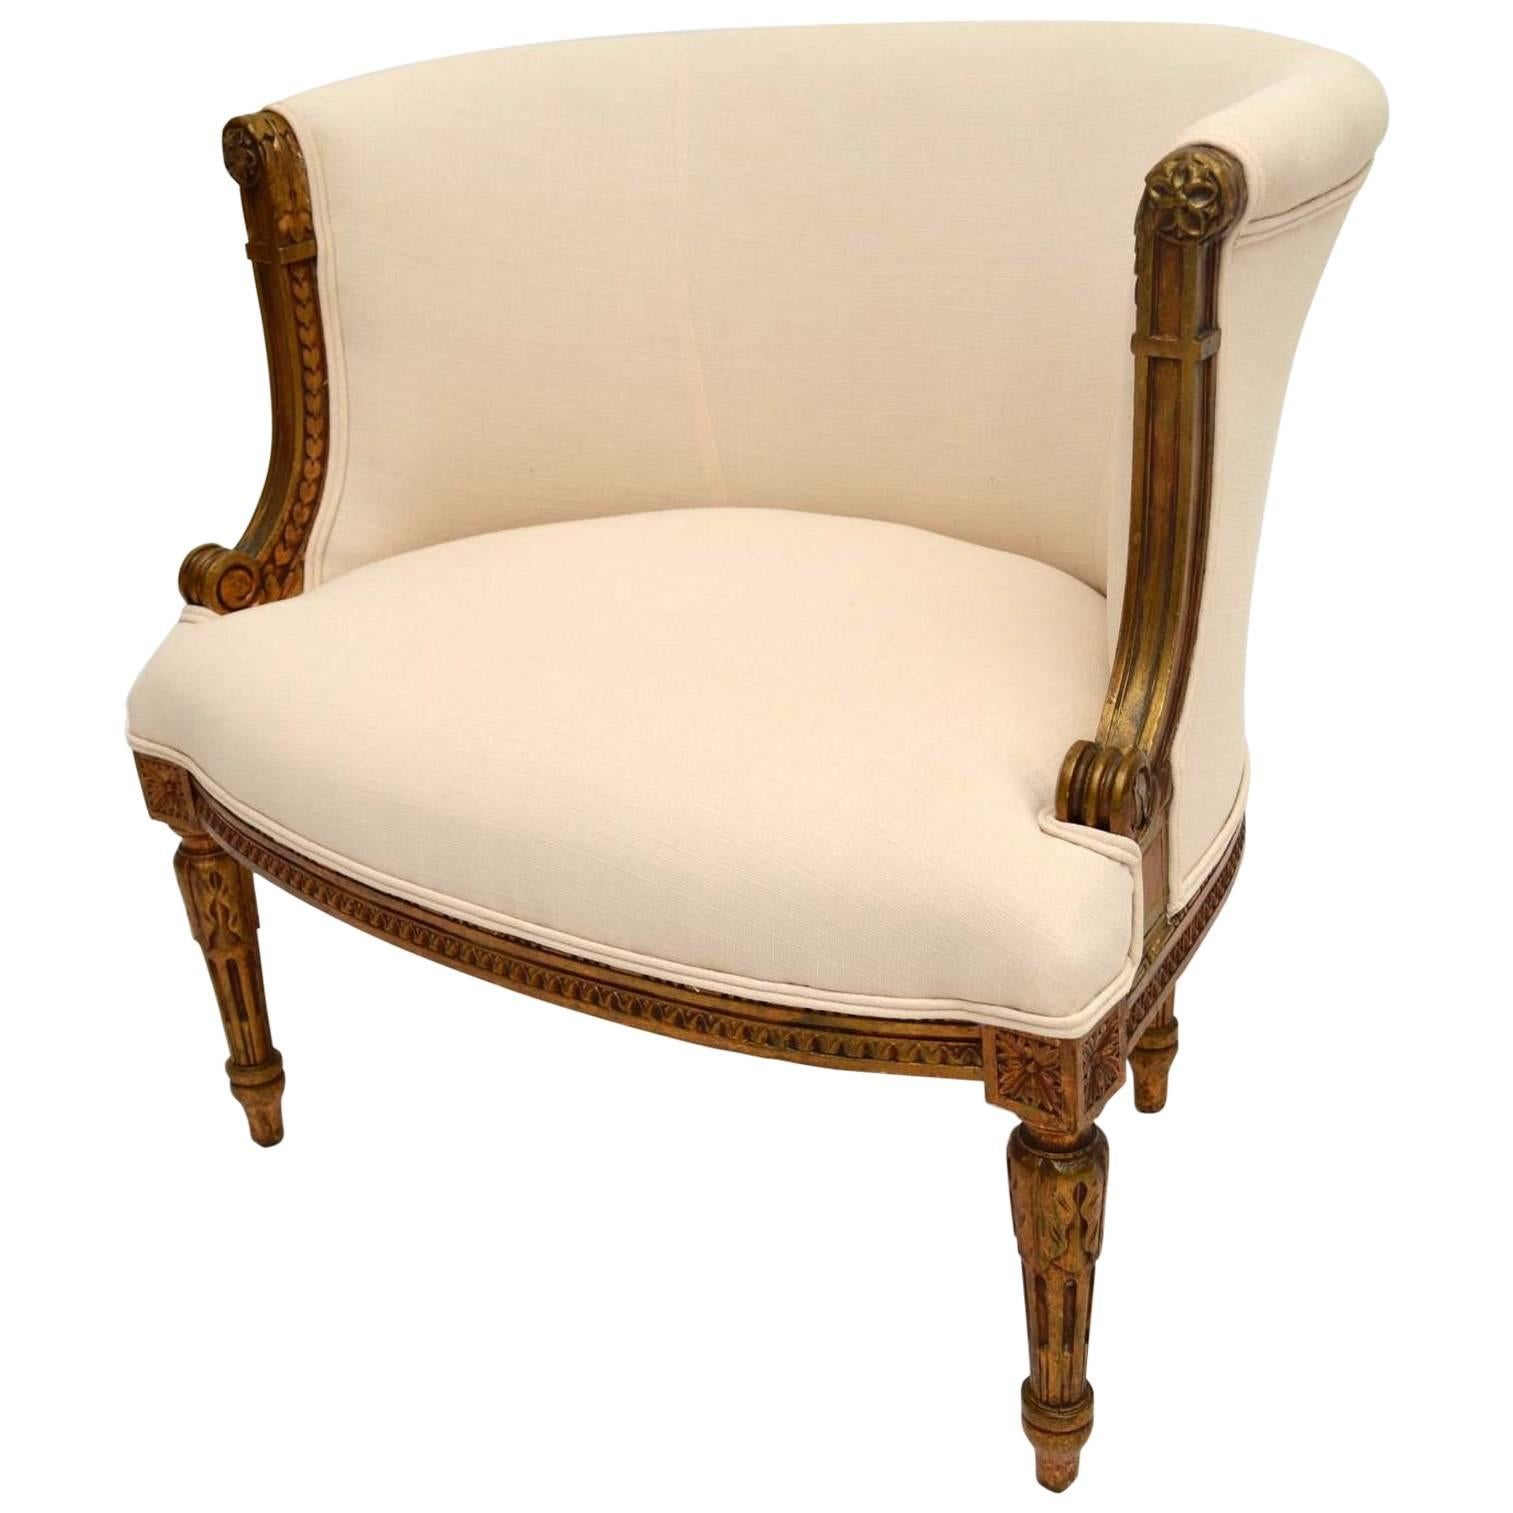 Antique 19th Century French Giltwood Armchair